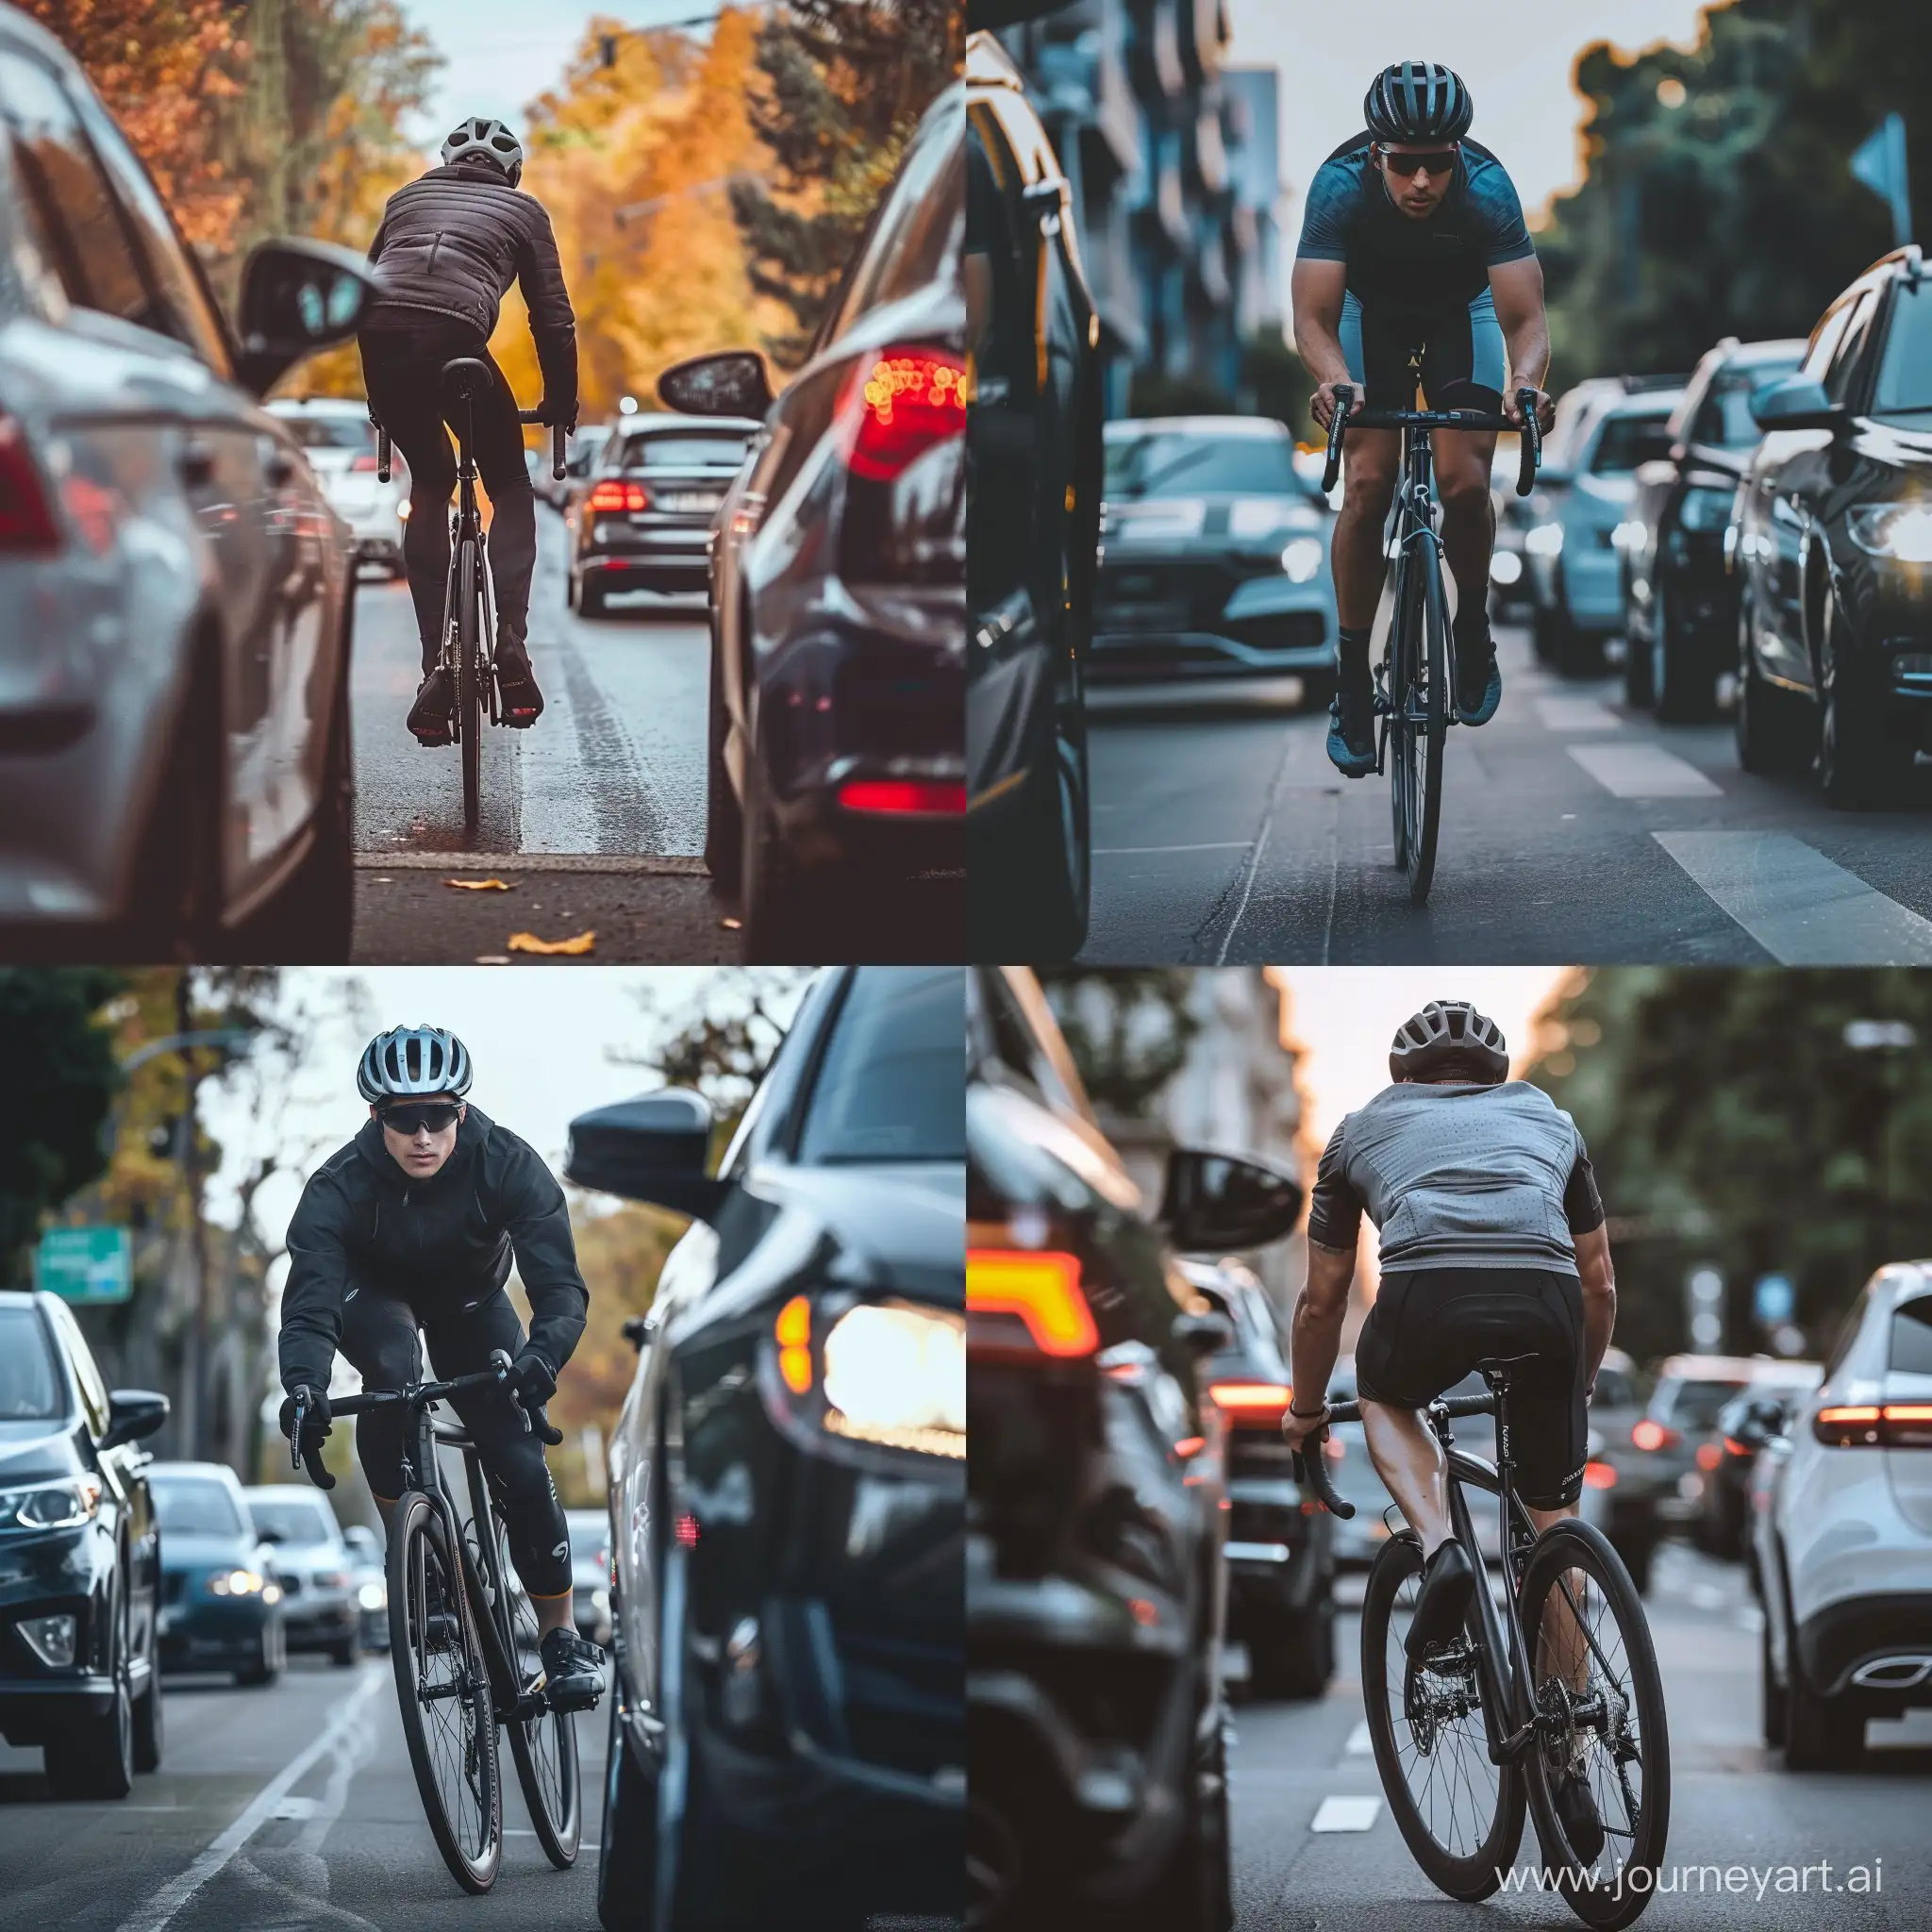 cyclist on a fixed gear cycle riding between the cars